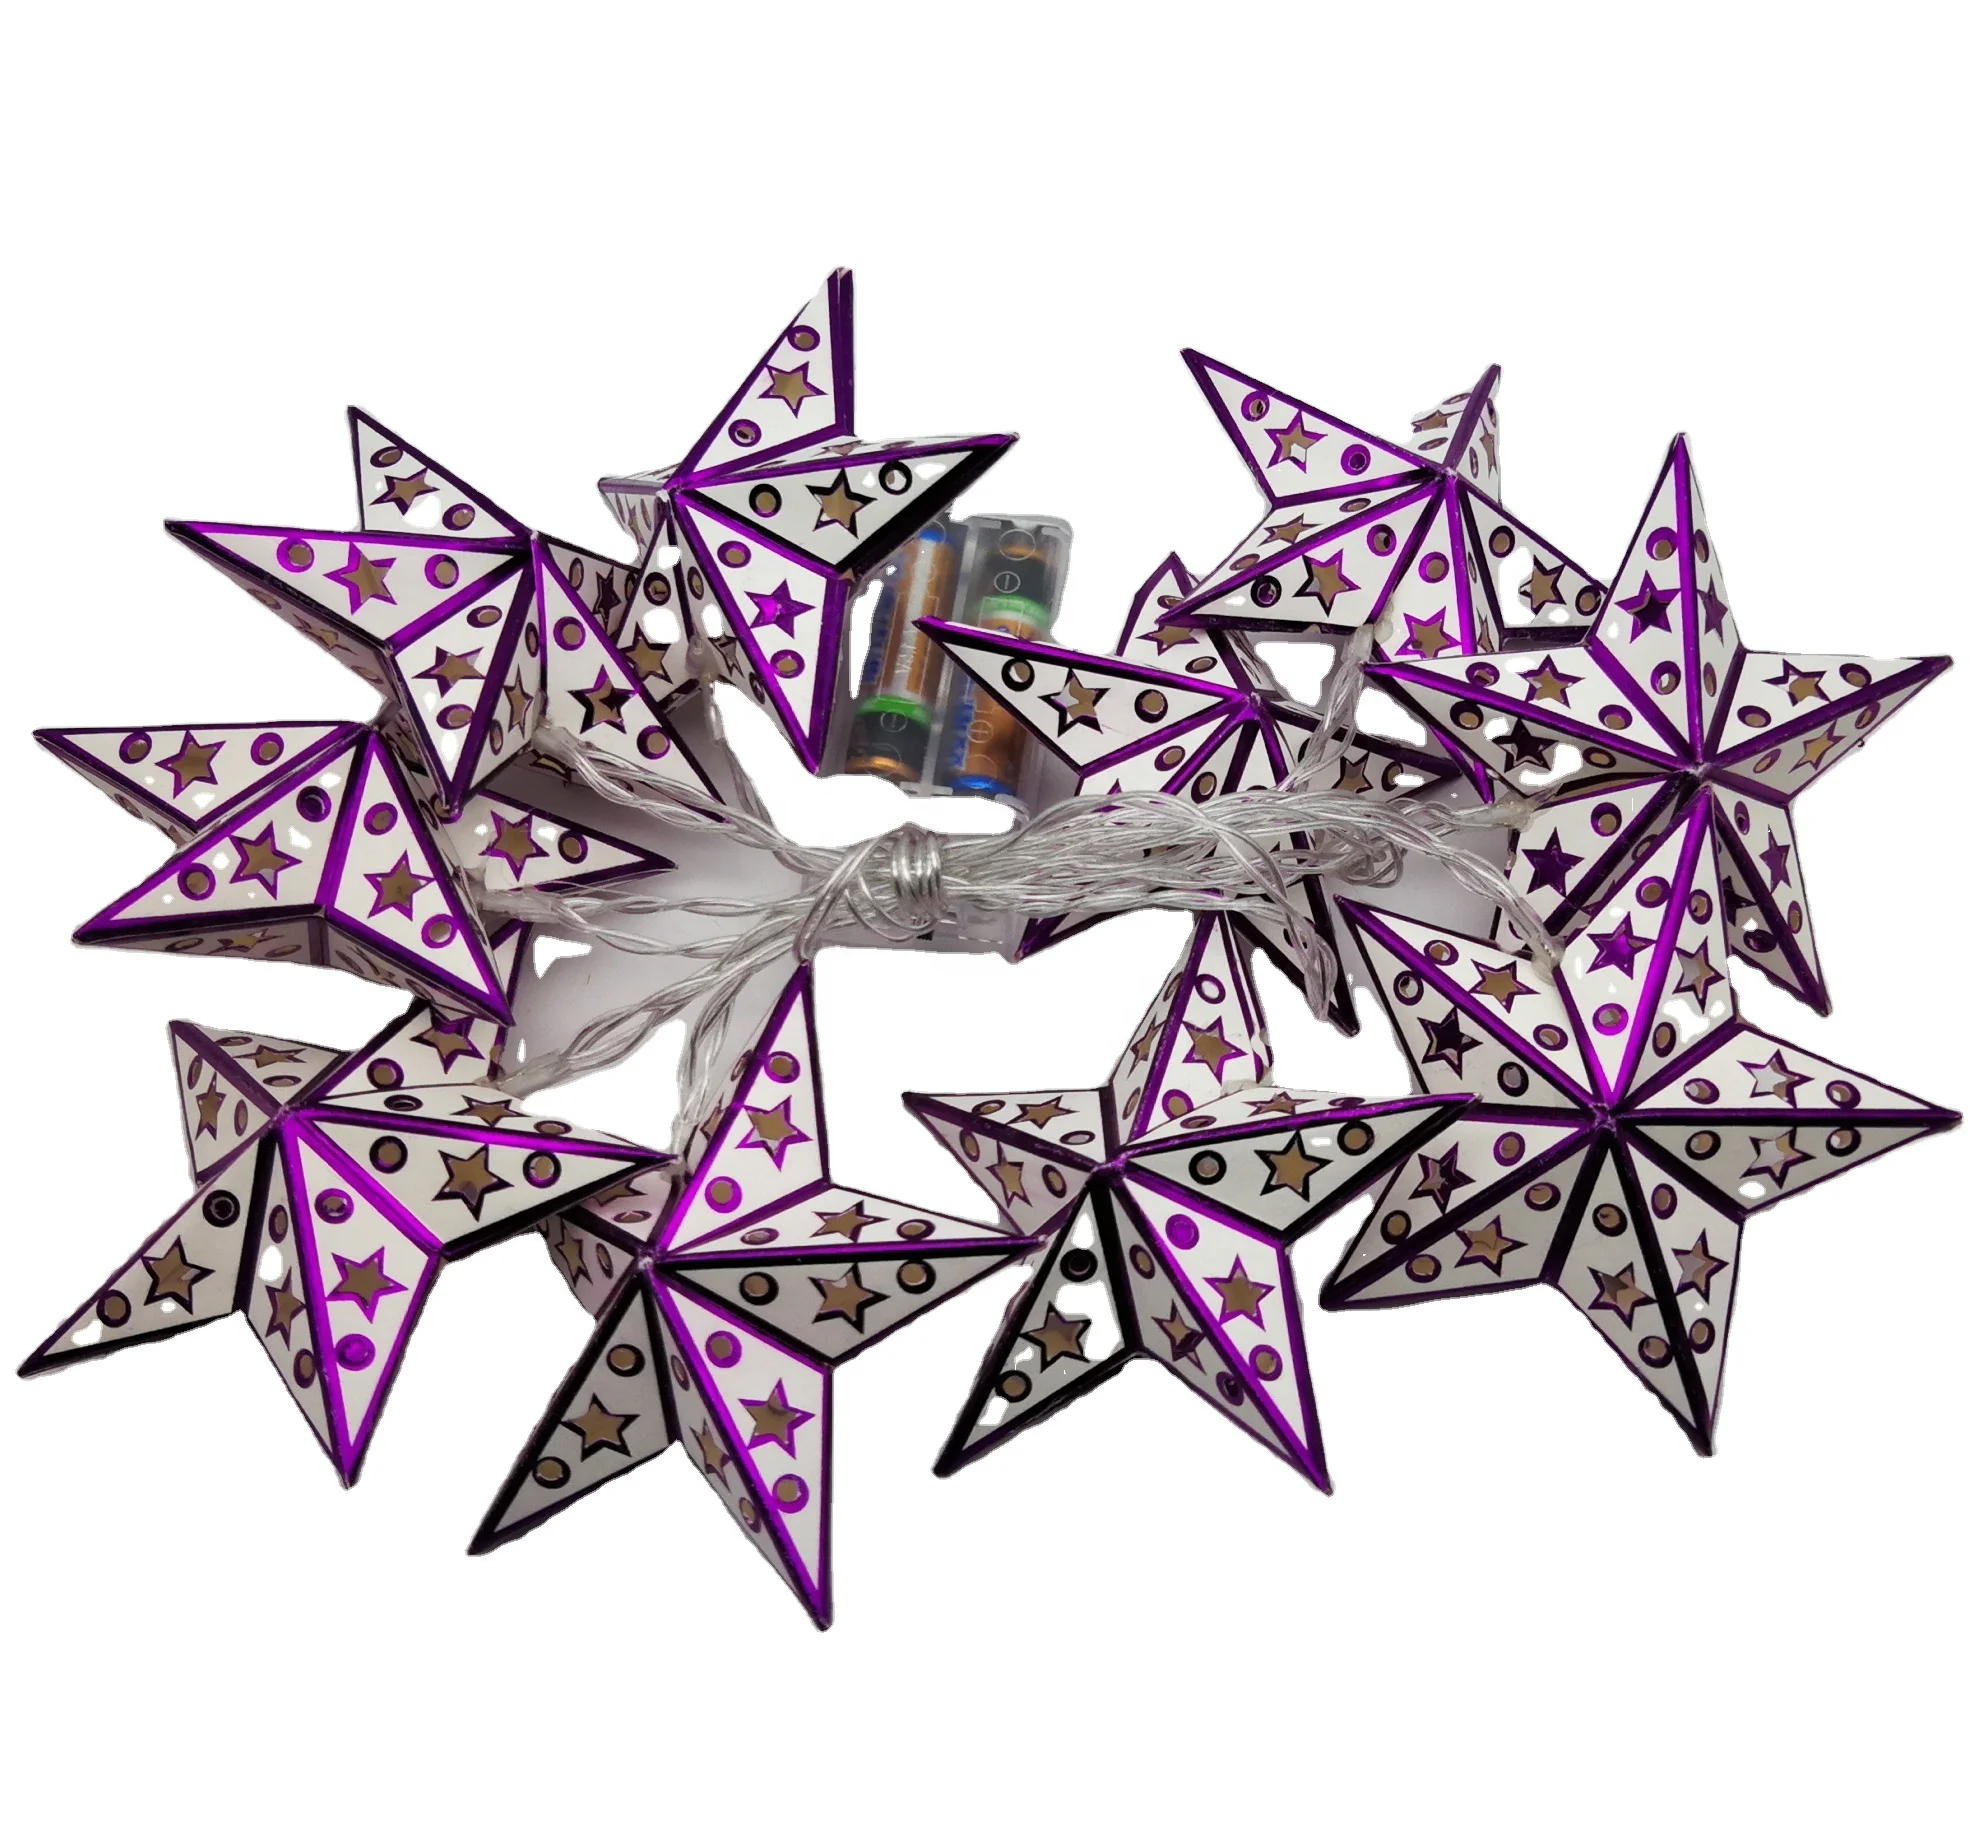 China Supplier Best Price Indoor Decoration LED Paper Star Fairy String Light for Home